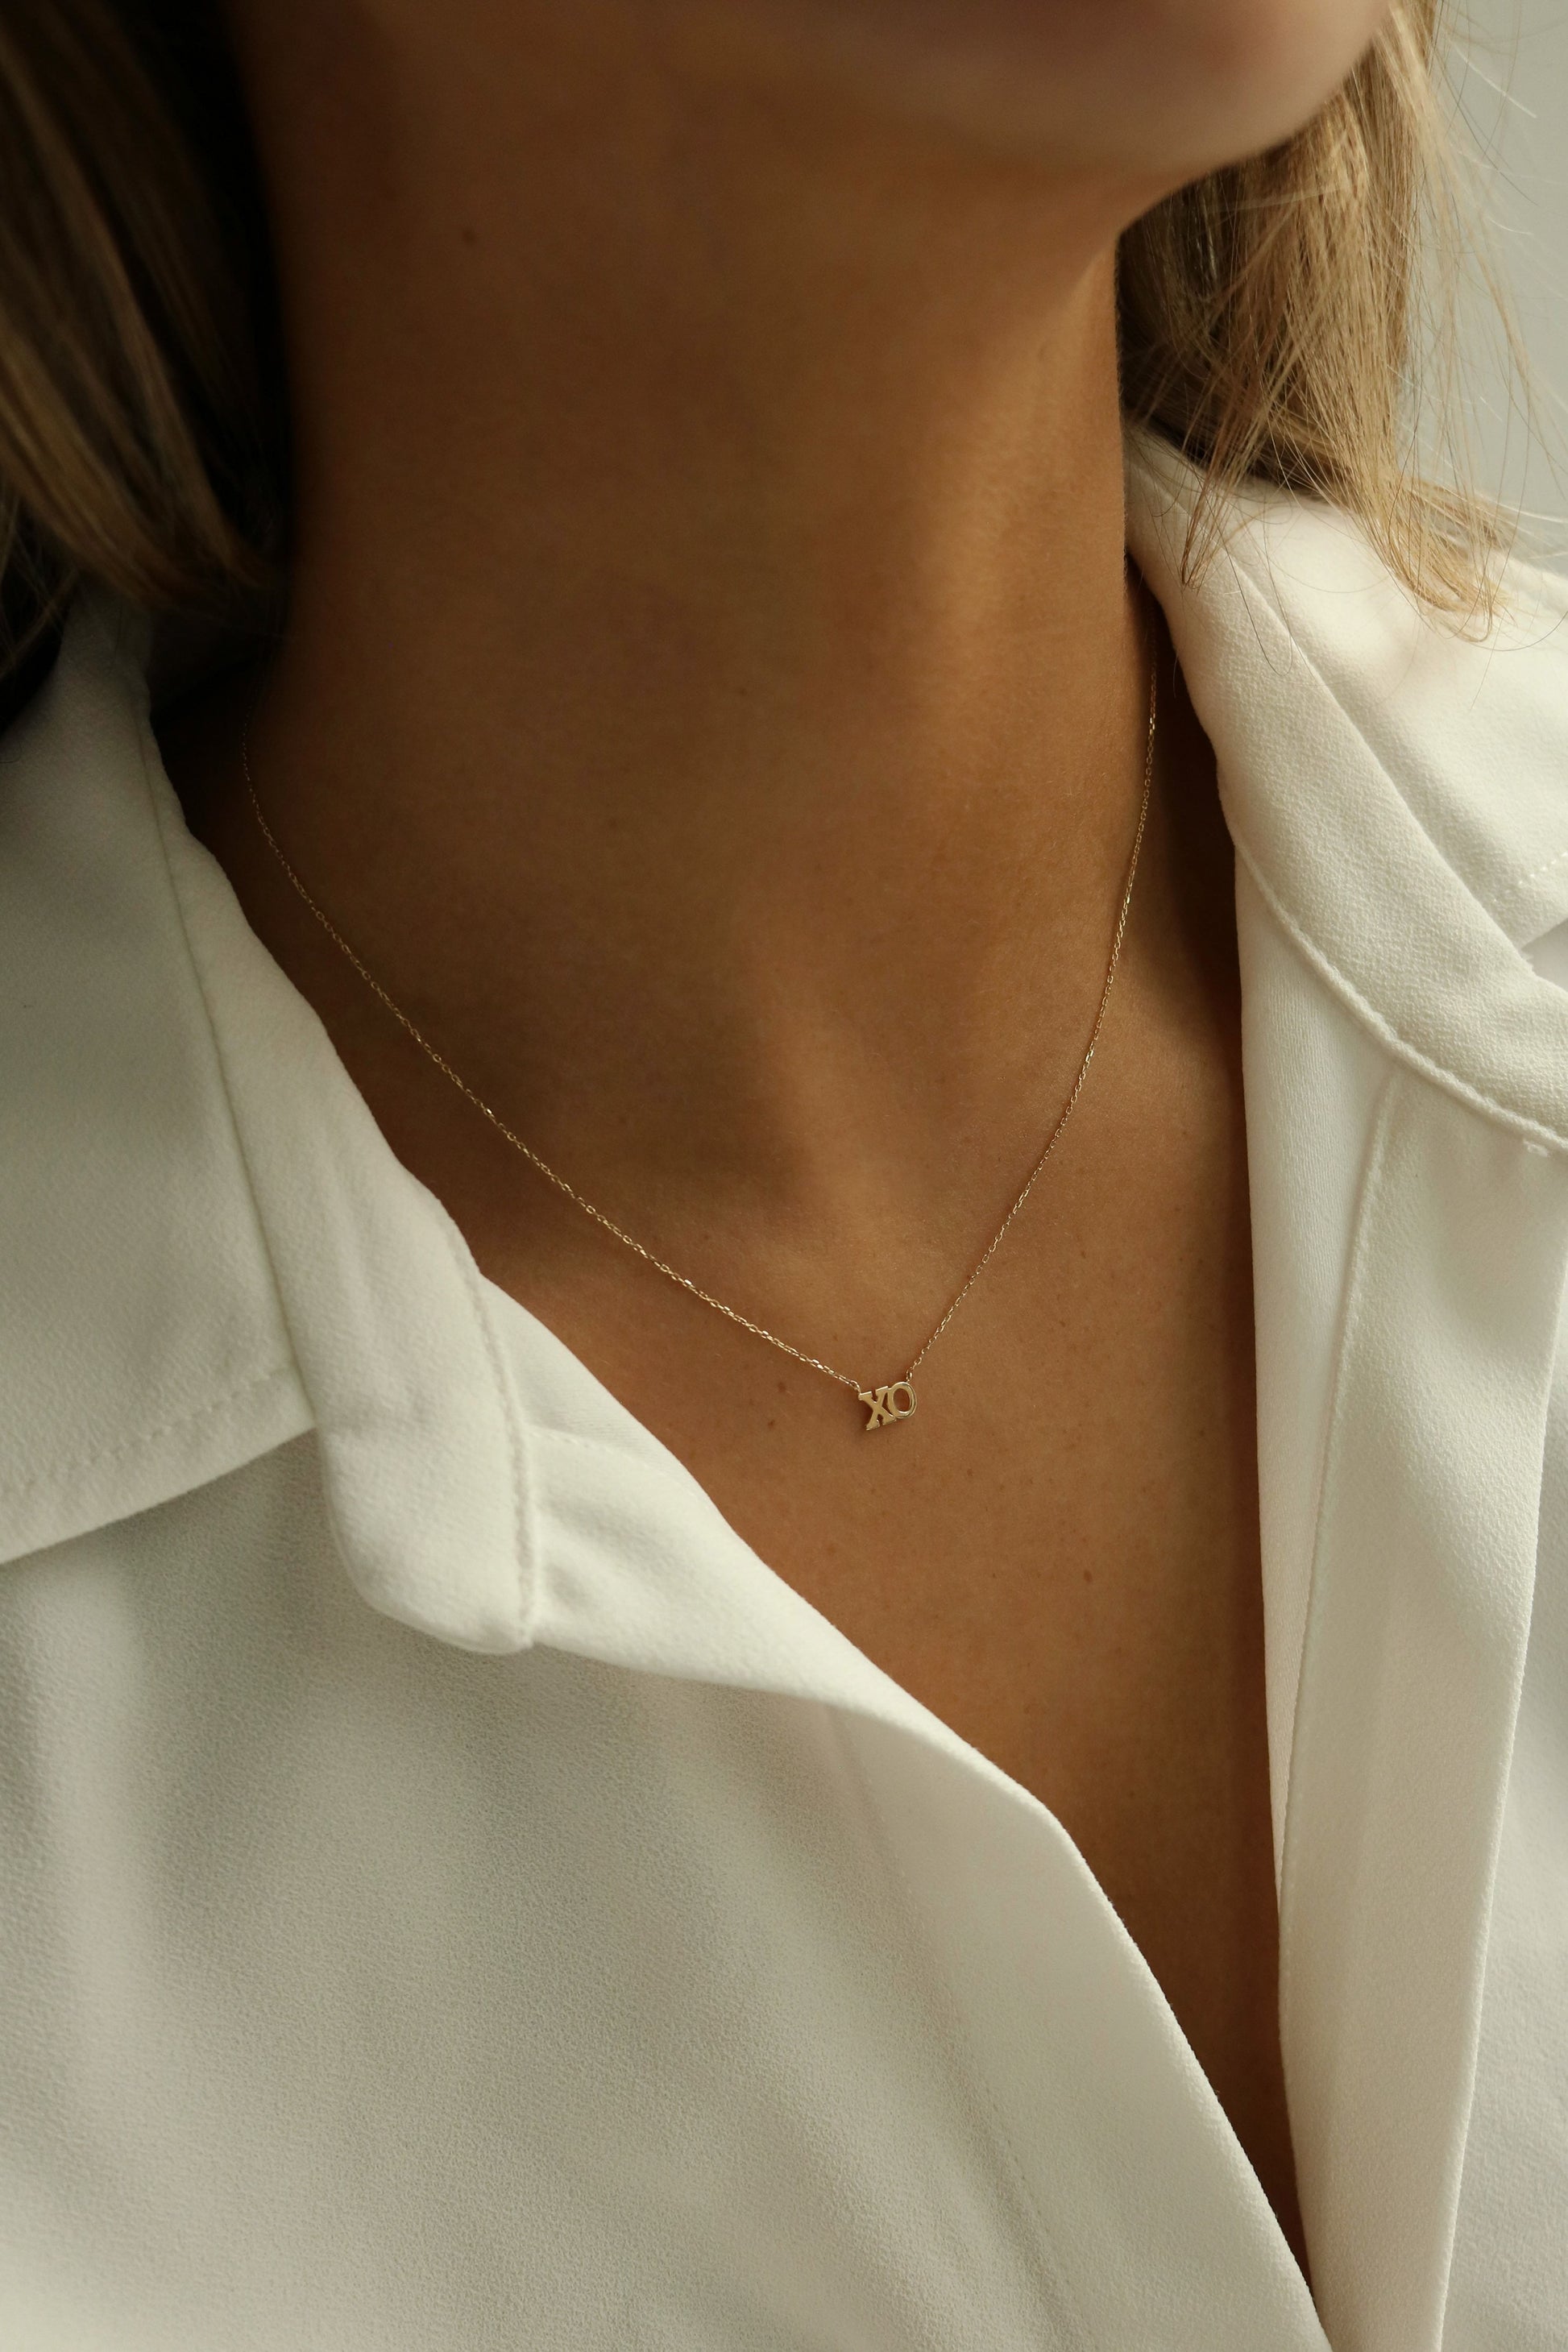 XO dainty necklace, 14k XOXO necklace, real gold love necklace